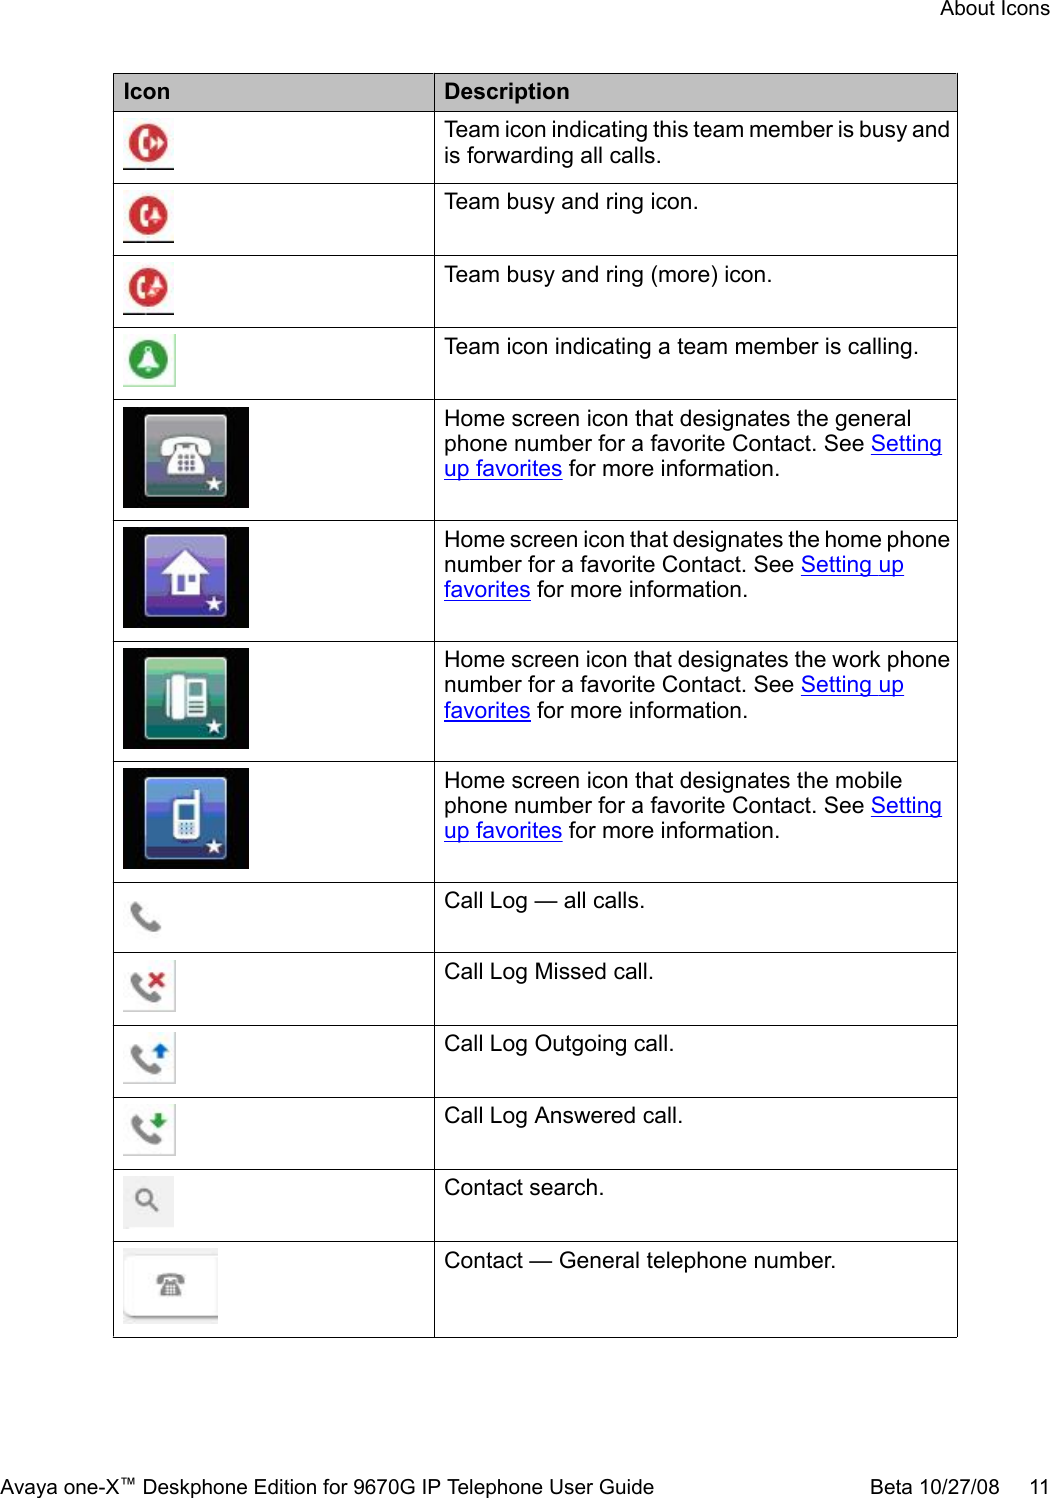 Icon DescriptionTeam icon indicating this team member is busy andis forwarding all calls.Team busy and ring icon.Team busy and ring (more) icon.Team icon indicating a team member is calling.Home screen icon that designates the generalphone number for a favorite Contact. See Settingup favorites for more information.Home screen icon that designates the home phonenumber for a favorite Contact. See Setting upfavorites for more information.Home screen icon that designates the work phonenumber for a favorite Contact. See Setting upfavorites for more information.Home screen icon that designates the mobilephone number for a favorite Contact. See Settingup favorites for more information.Call Log — all calls.Call Log Missed call.Call Log Outgoing call.Call Log Answered call.Contact search.Contact — General telephone number.About IconsAvaya one-X™ Deskphone Edition for 9670G IP Telephone User Guide Beta 10/27/08     11